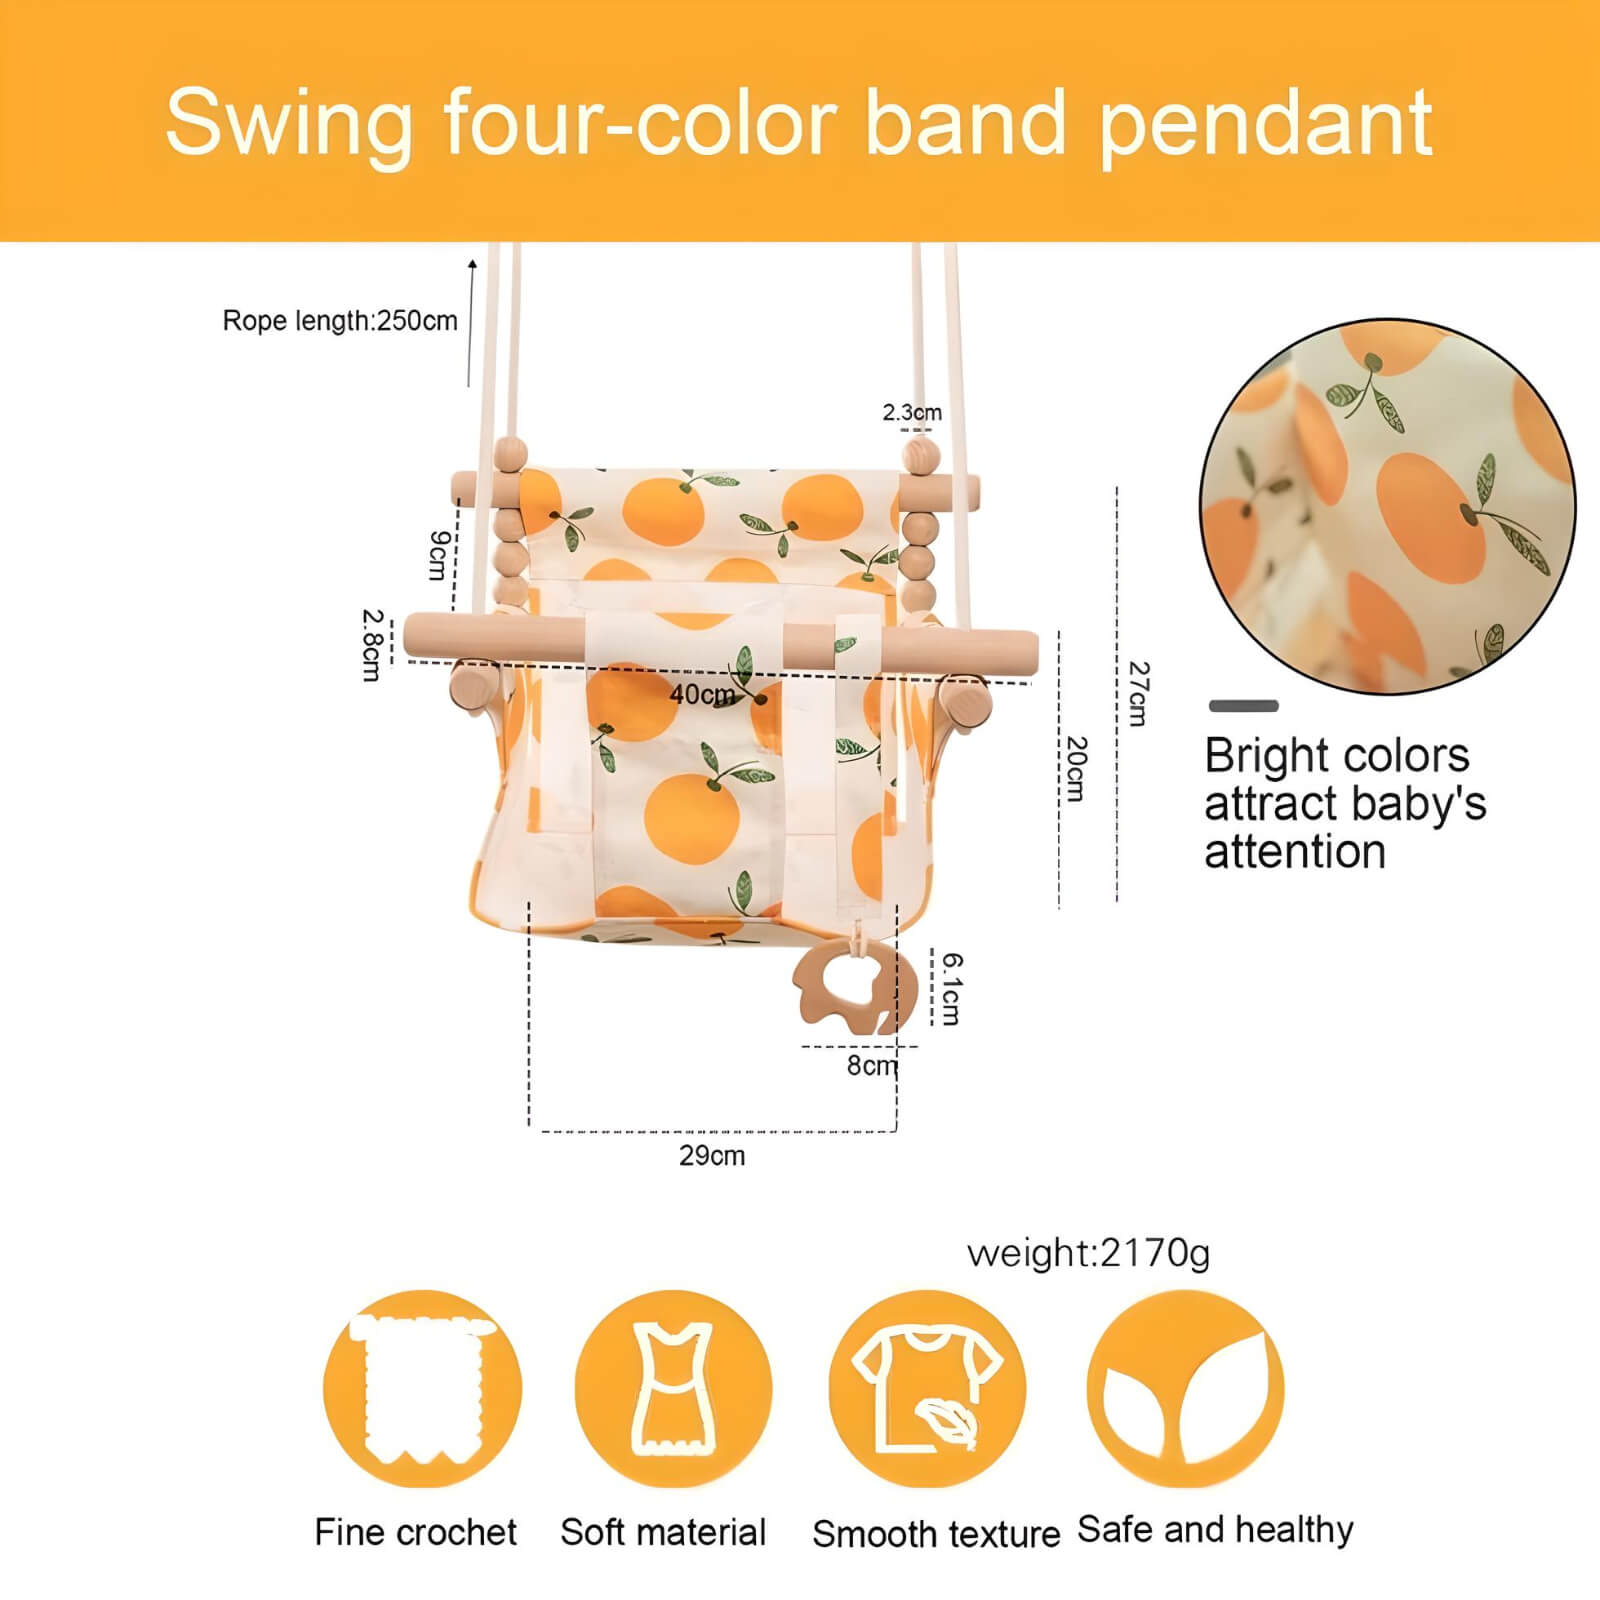 hammock-swing-for-baby-swing-four-color-band-pendant